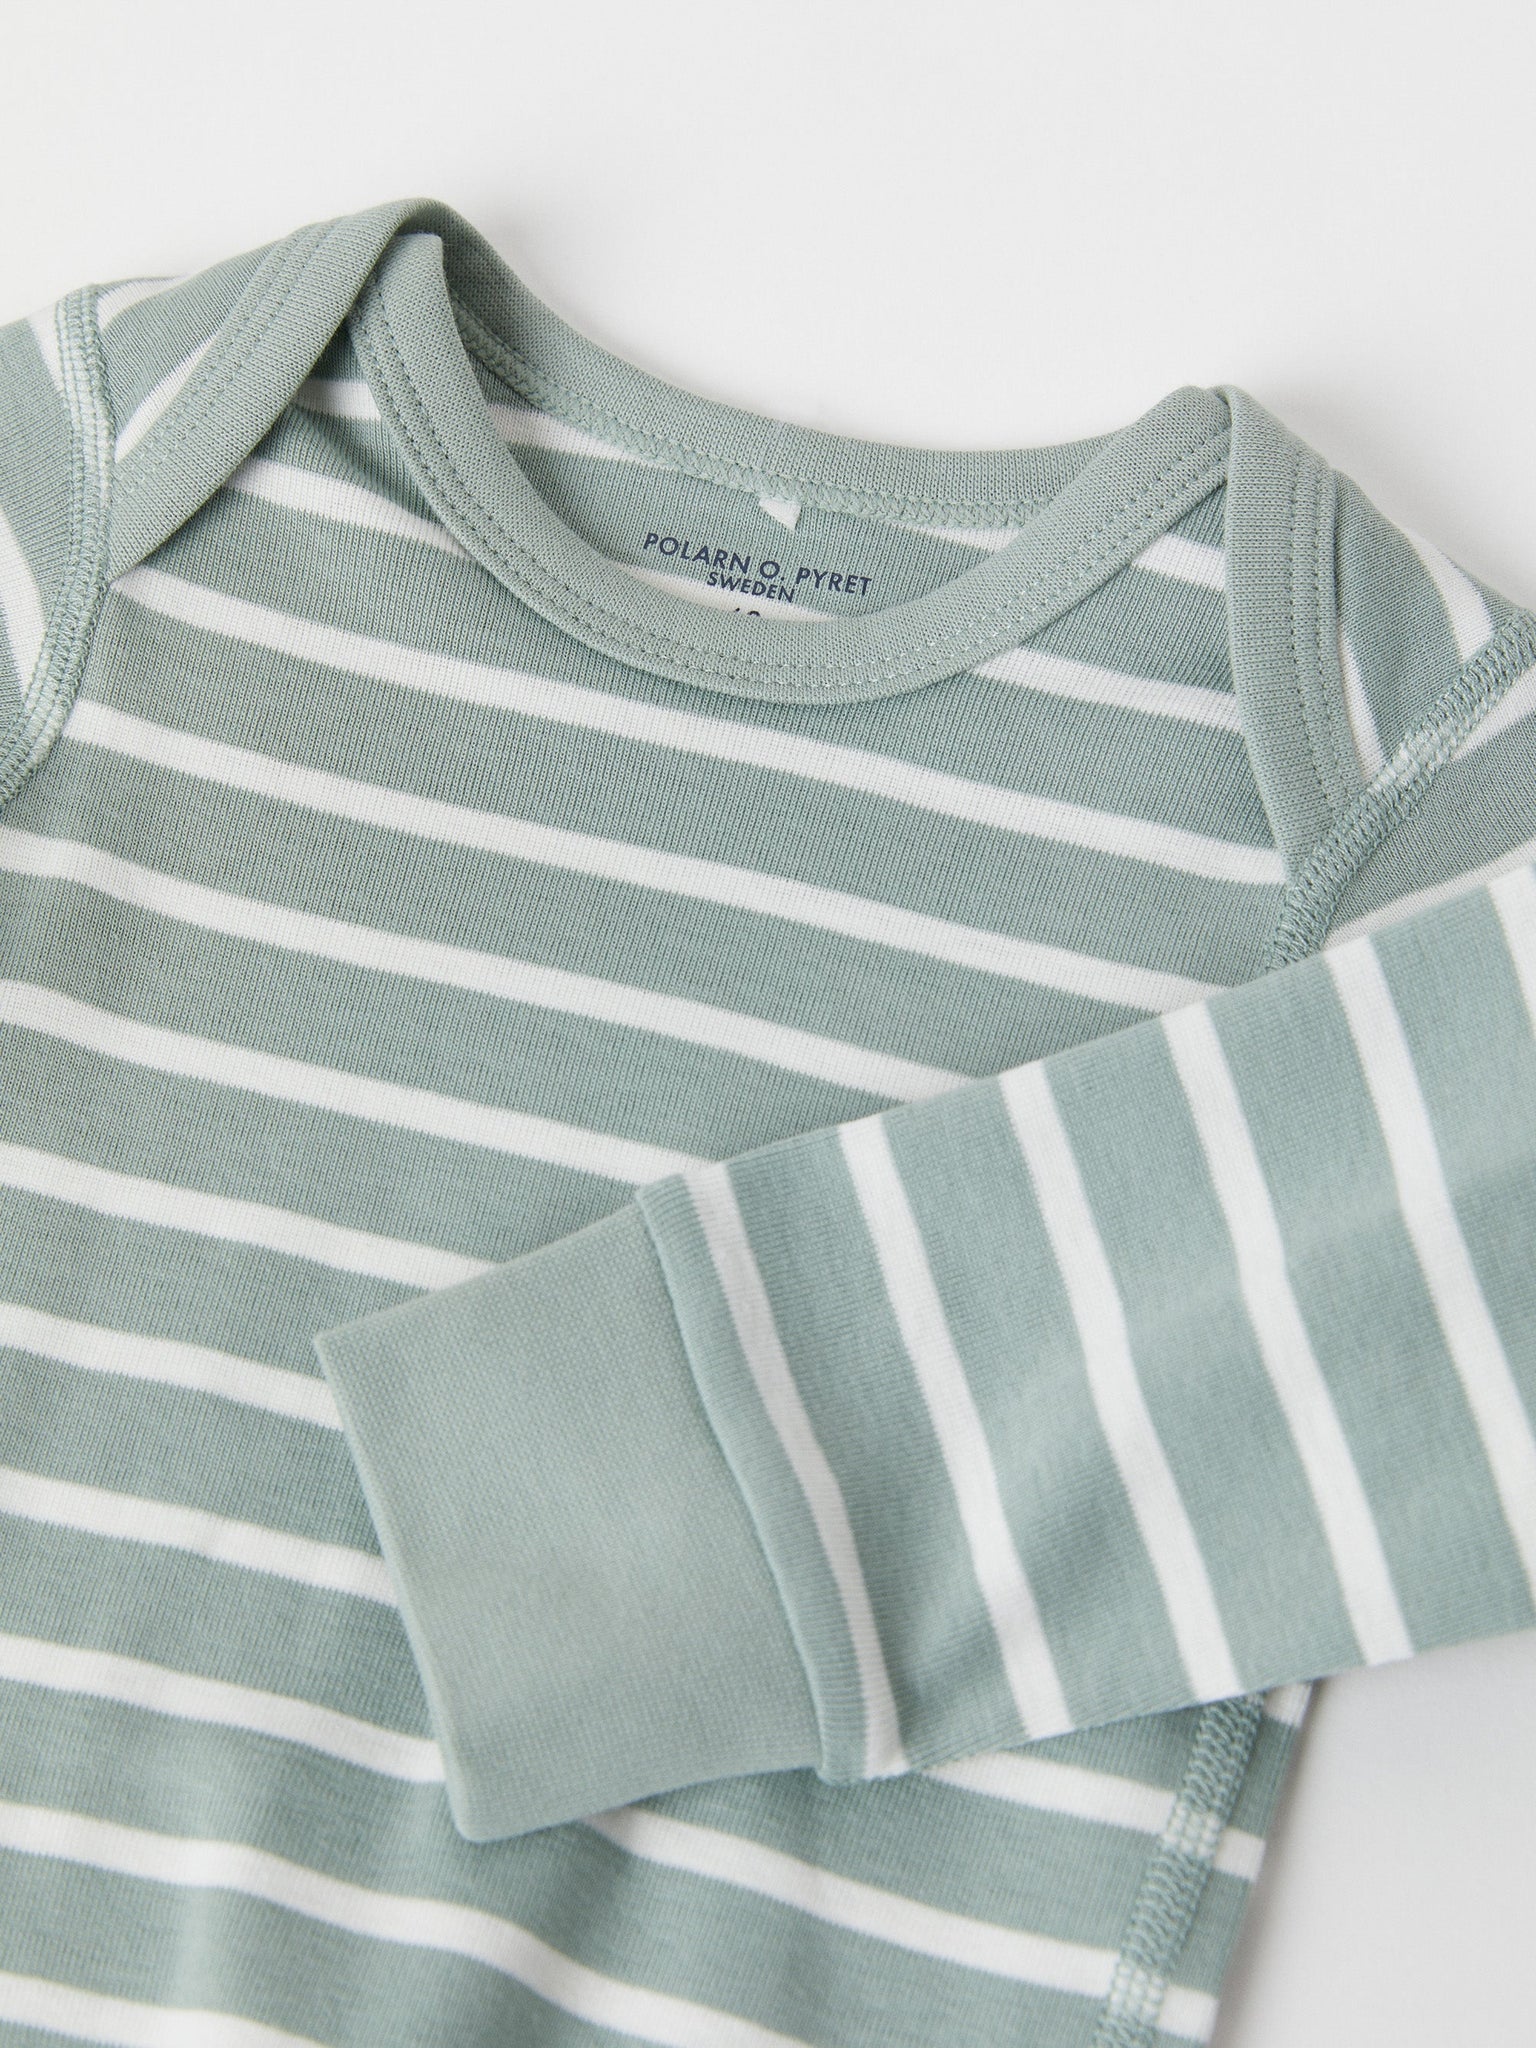 Organic Cotton Green Babygrow from the Polarn O. Pyret baby collection. Ethically produced baby clothing.